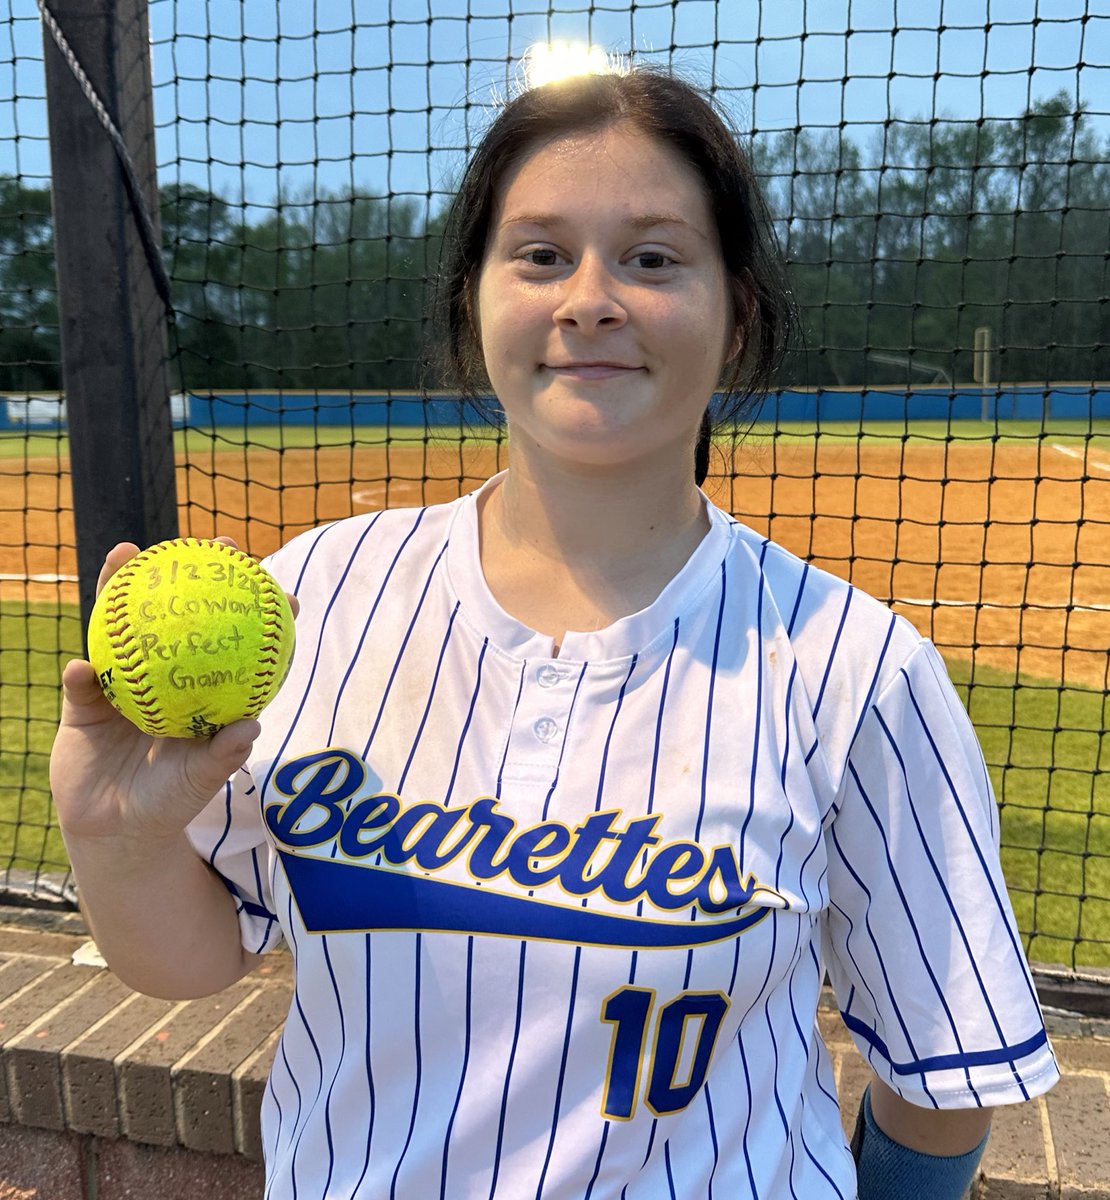 Congratulations to our #10 Cheyenne Cowart! She pitched a PERFECT GAME tonight! All of her hard work is paying off!
#AlwaysMovingForward #Sharks